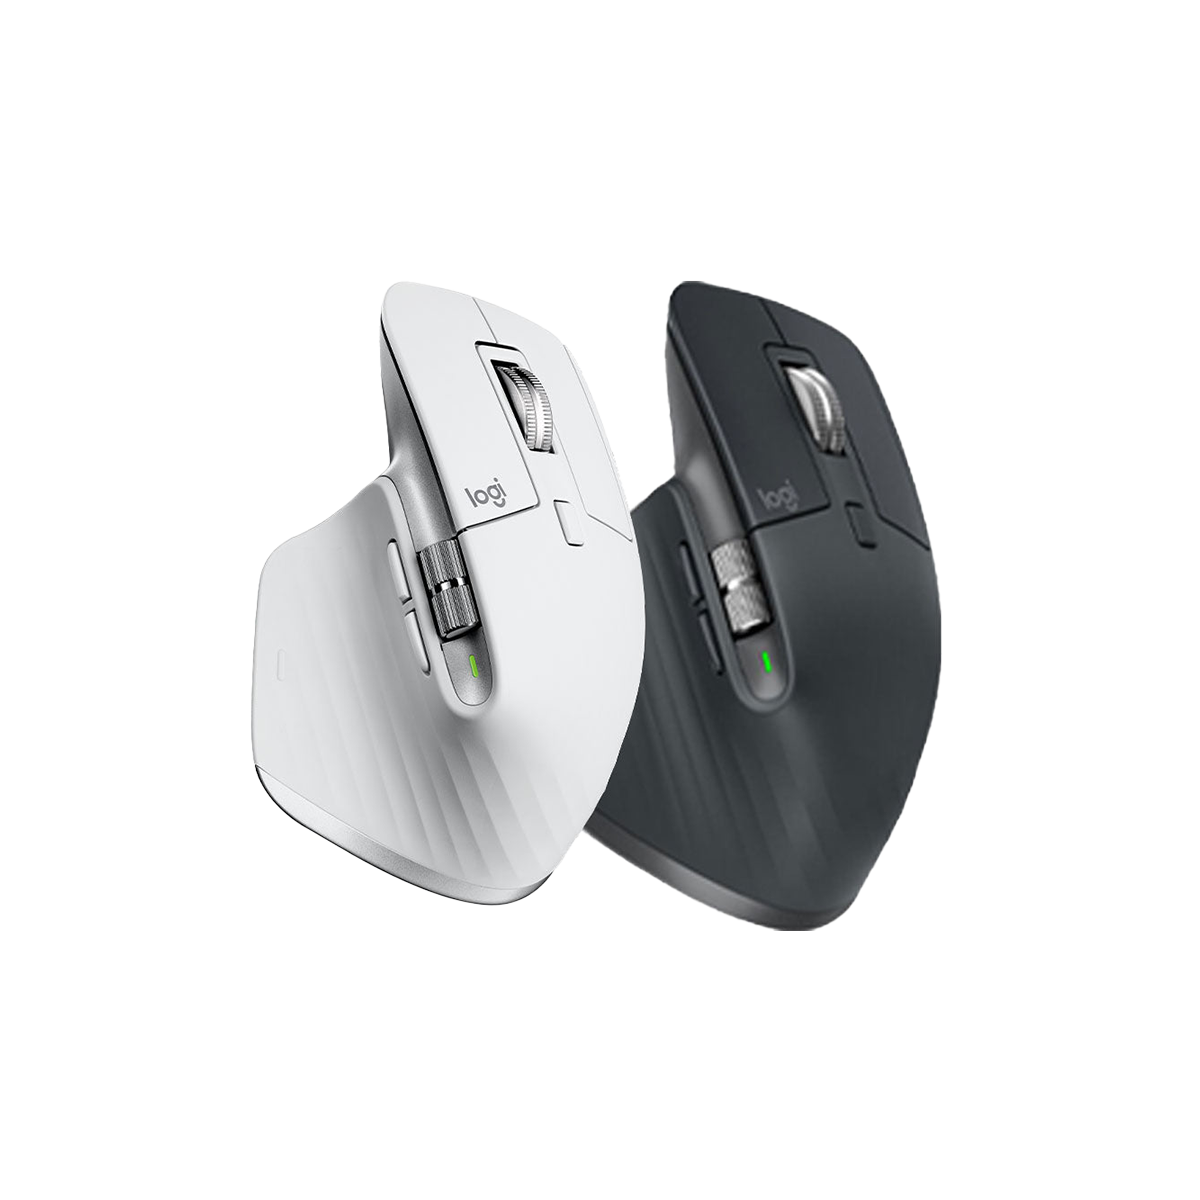 MX MASTER 3S High Performance Wireless Mouse